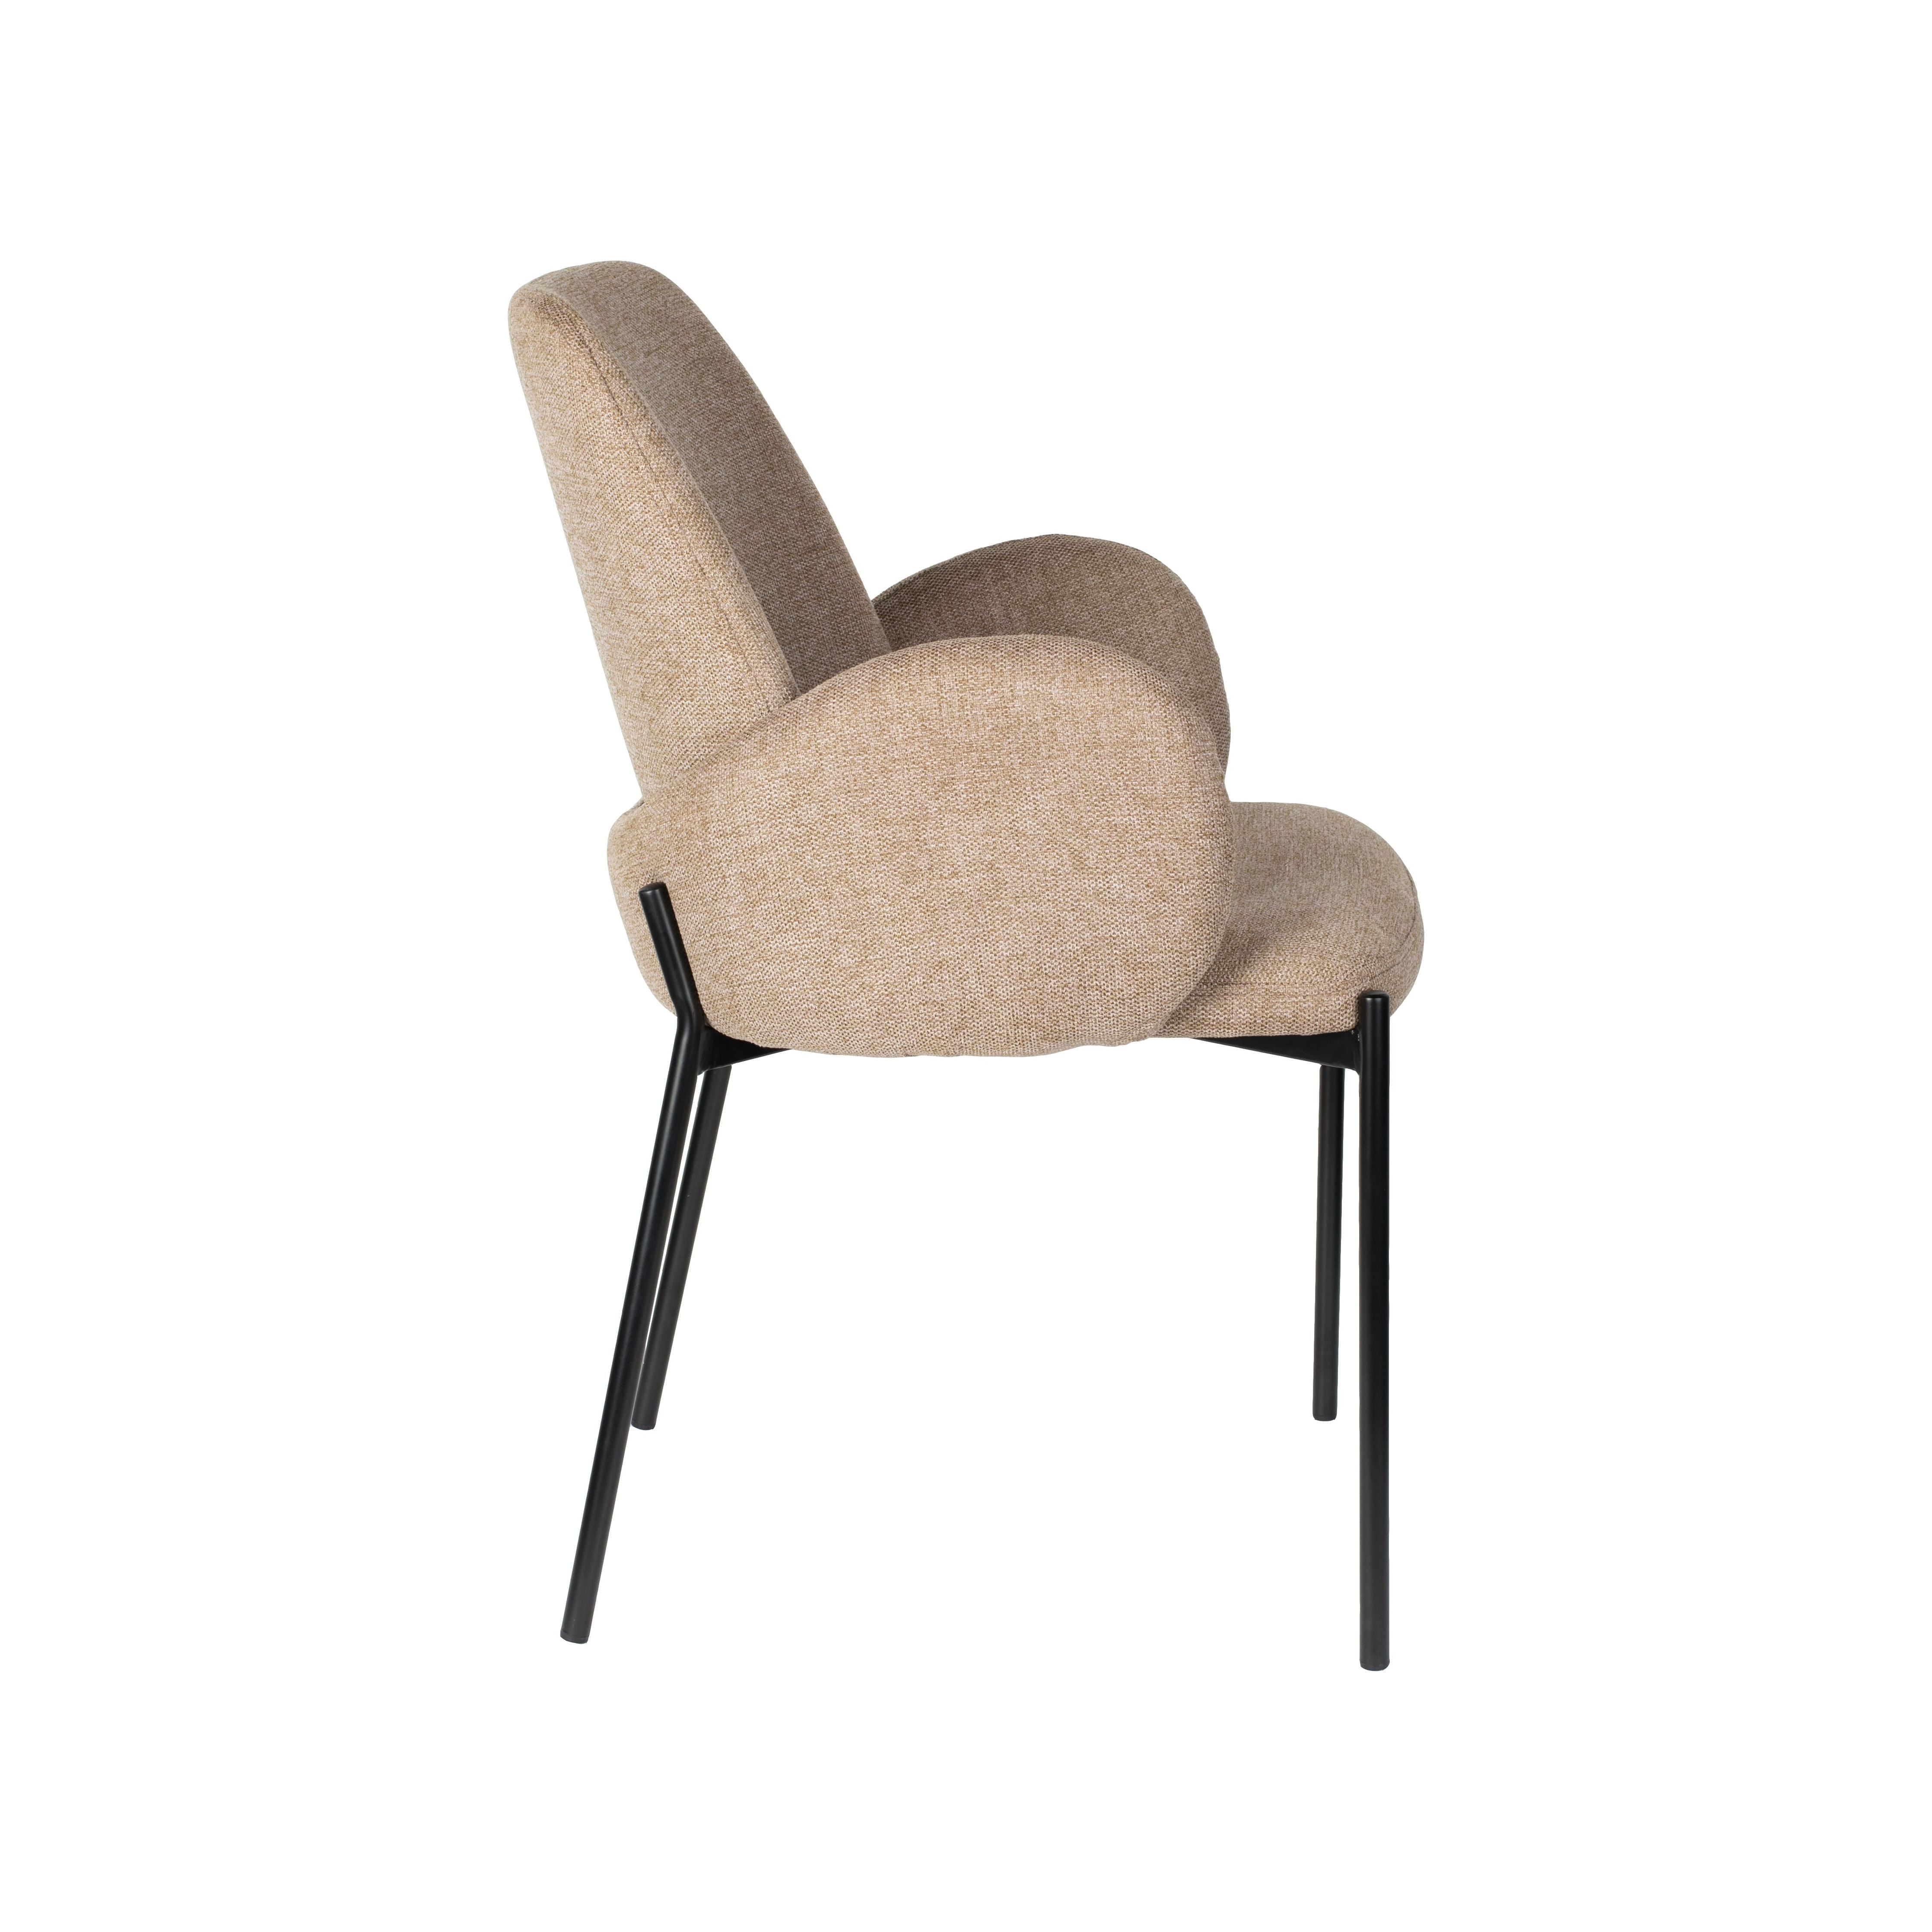 Chair tjarda brown | 2 pieces